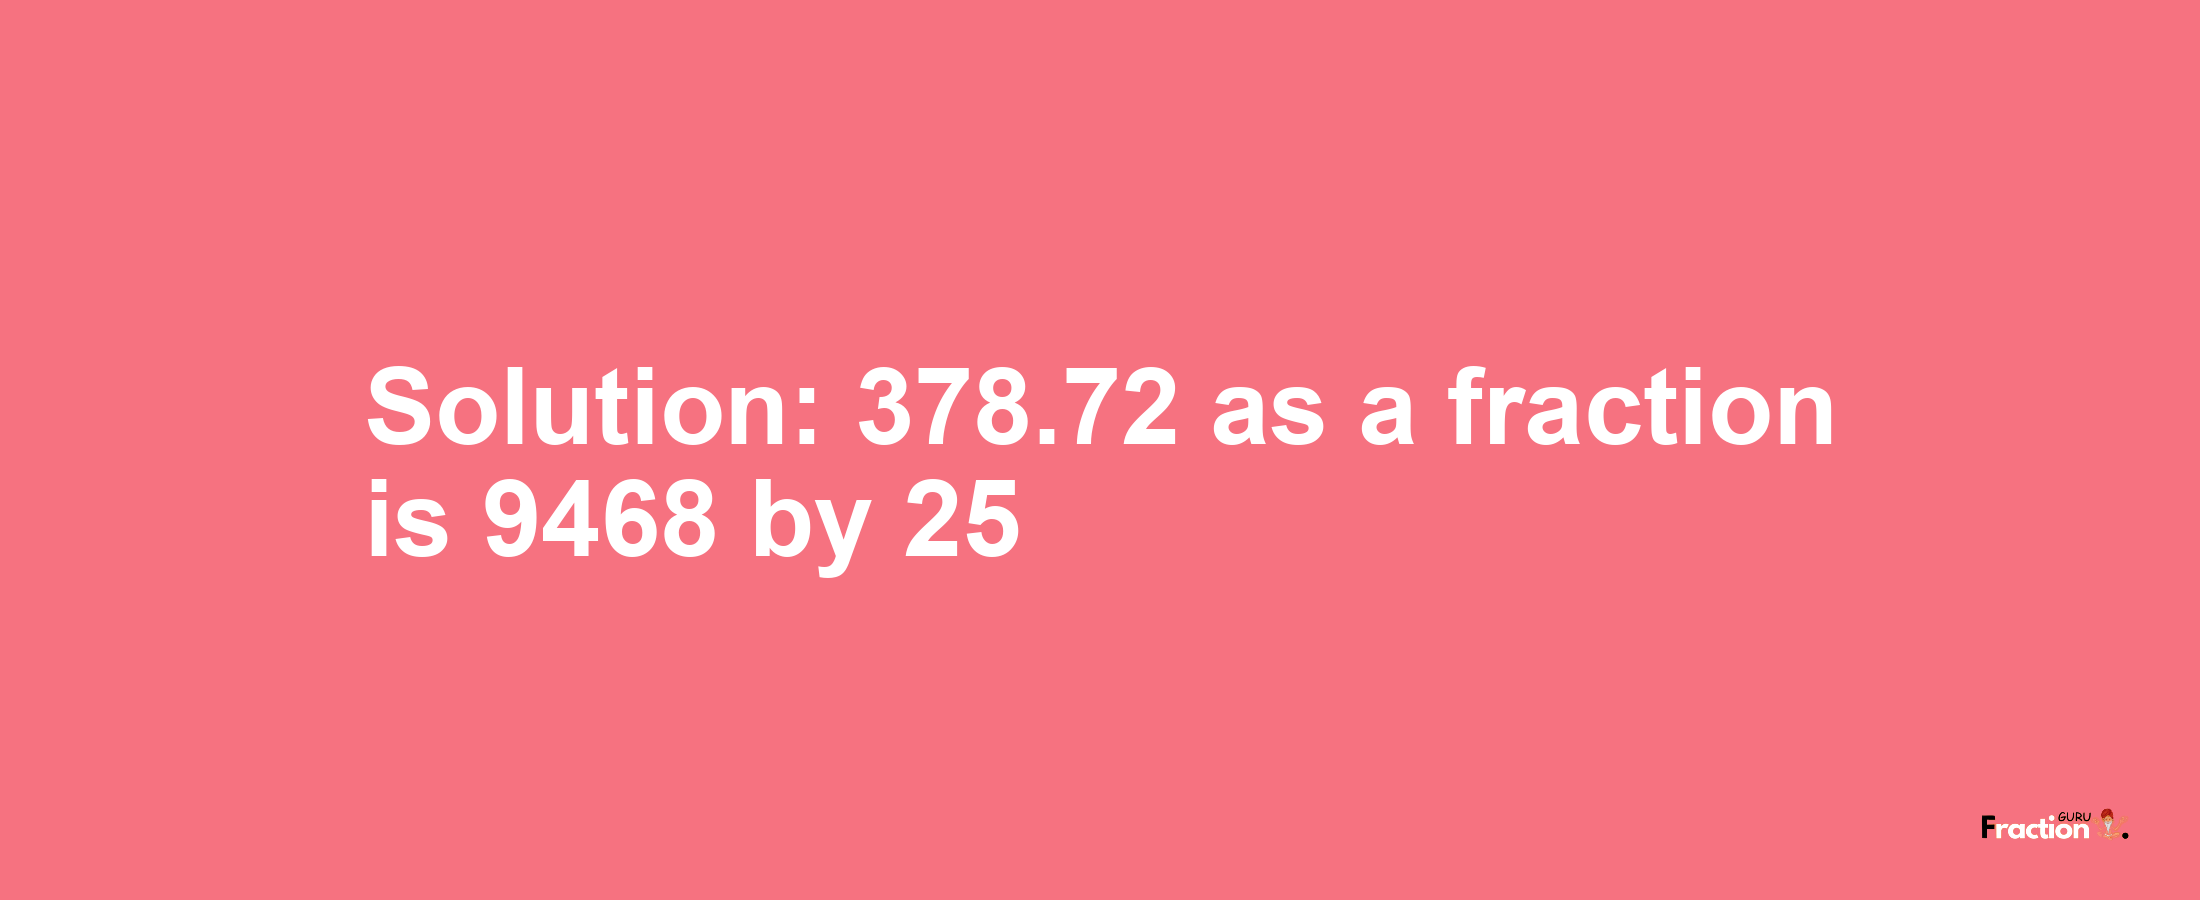 Solution:378.72 as a fraction is 9468/25